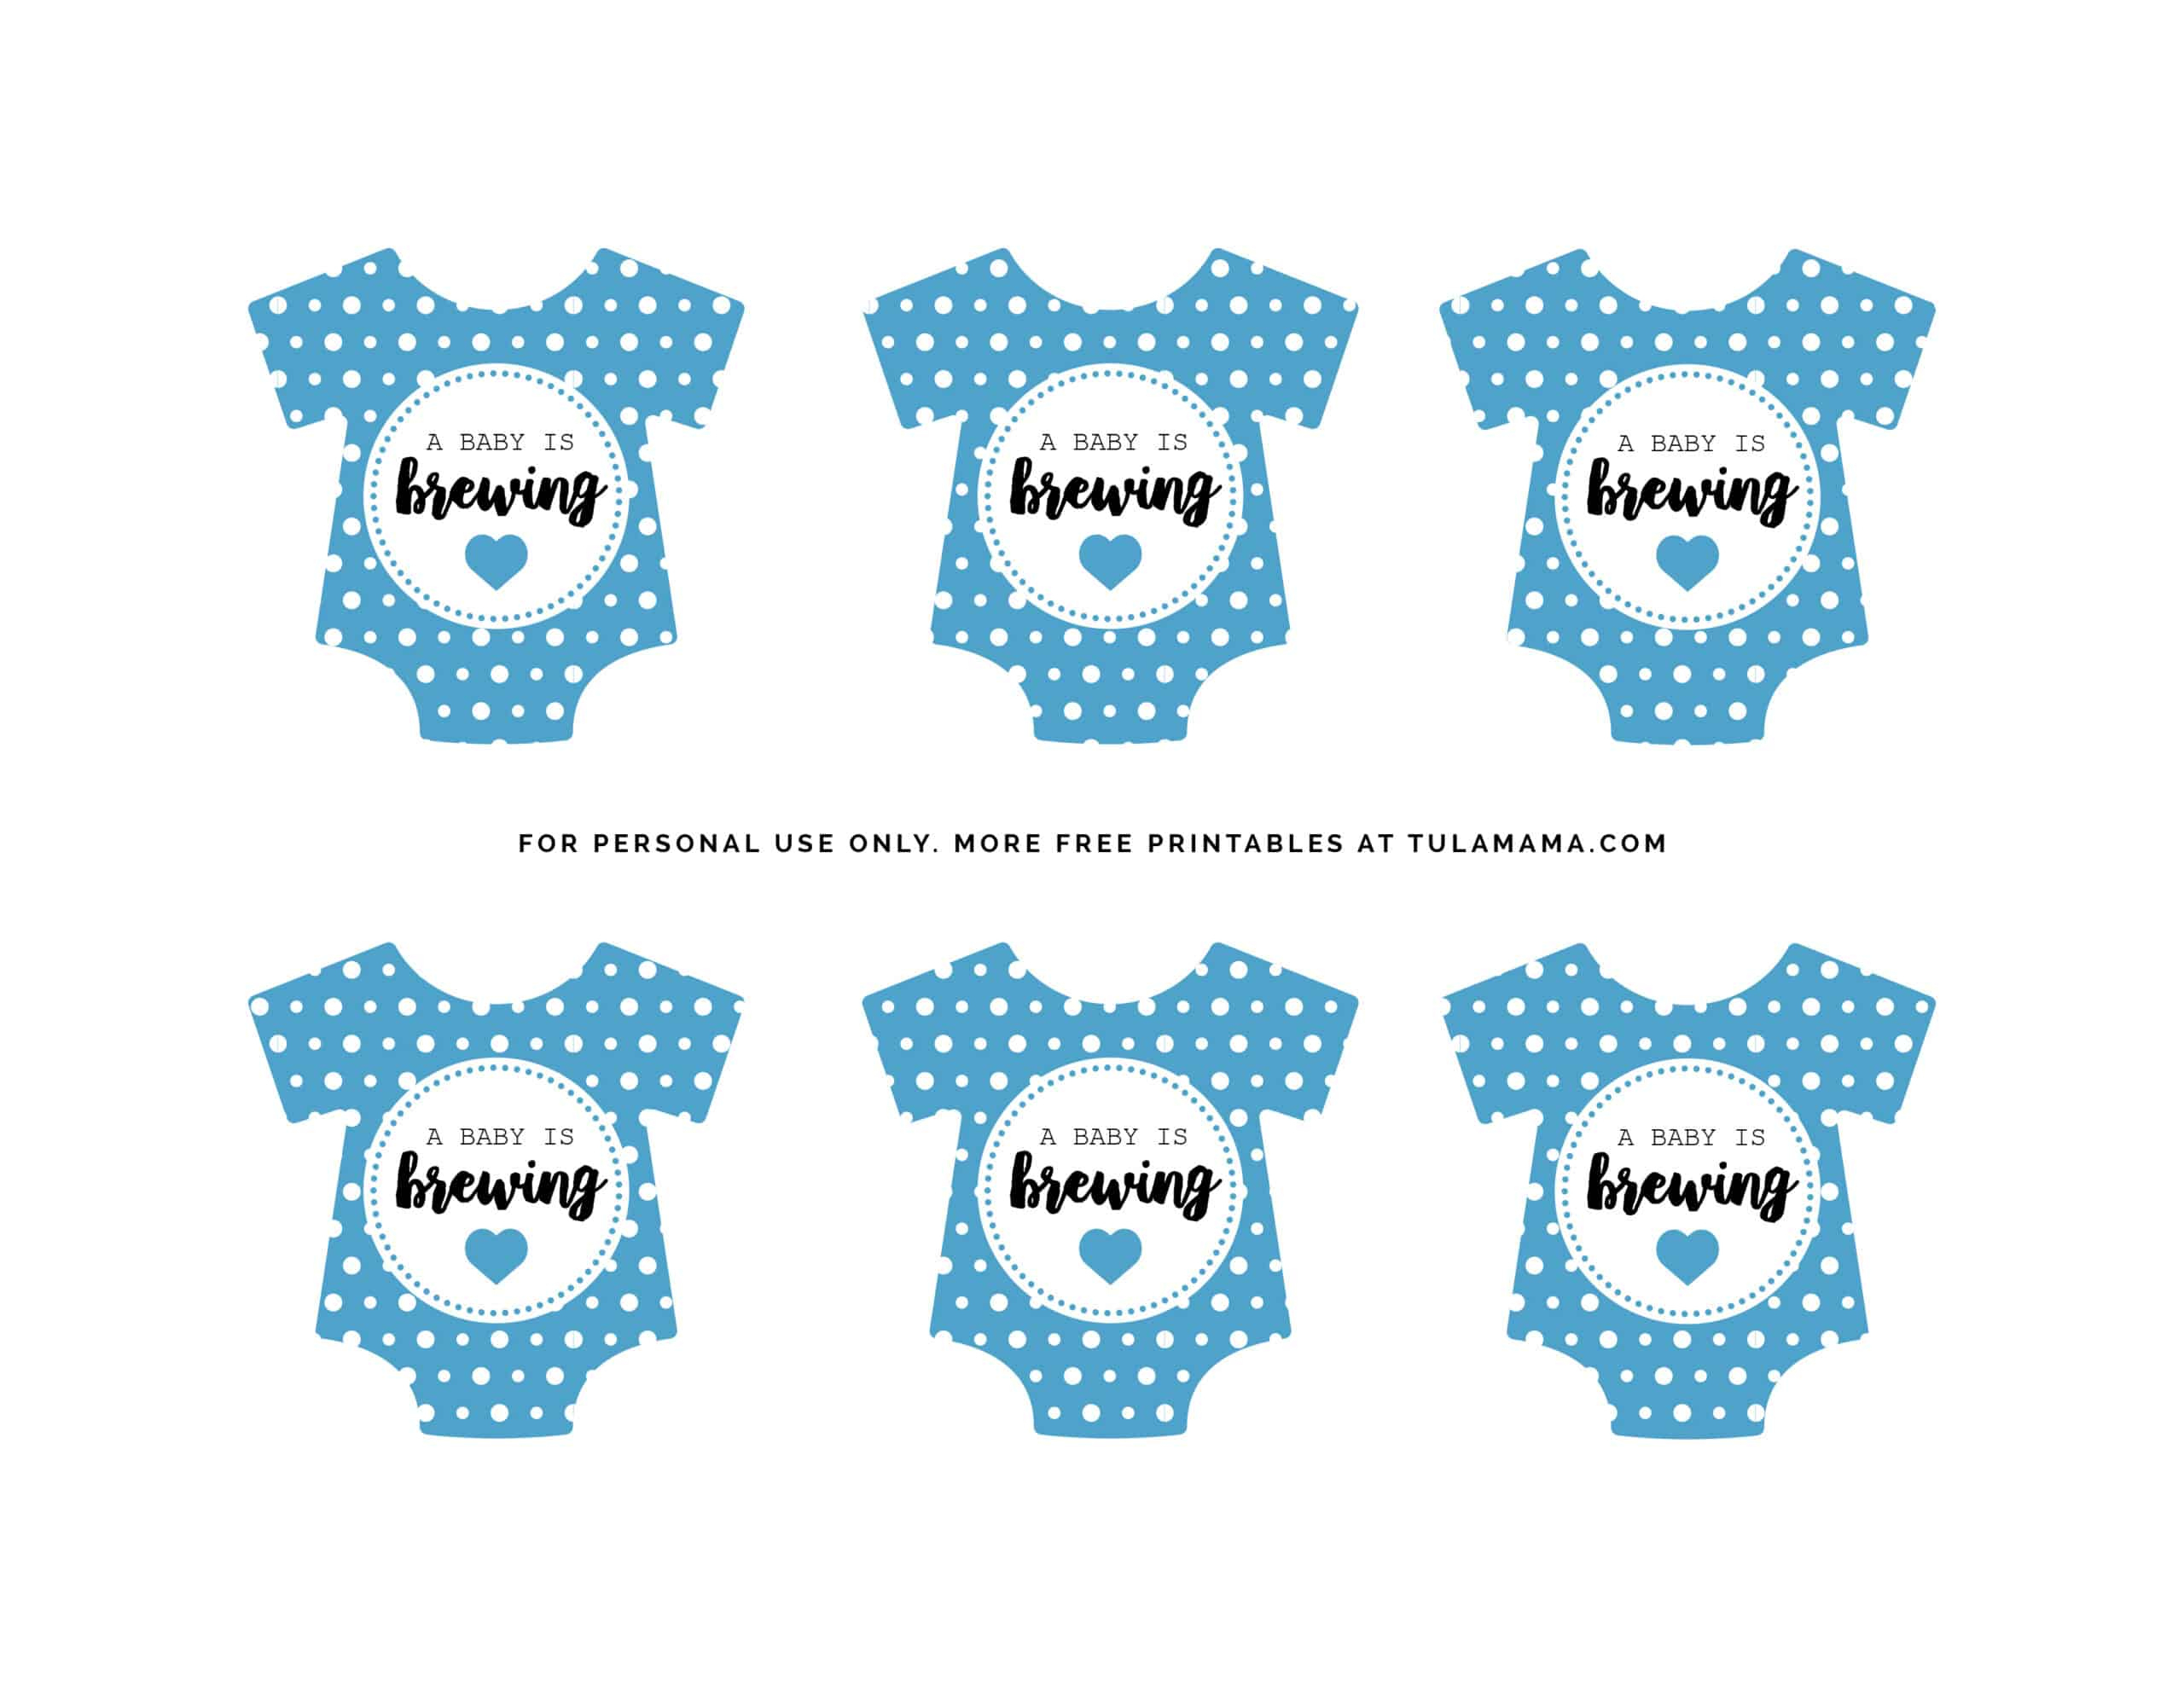 Free &amp;quot;A Baby Is Brewing&amp;quot; Baby Shower Printables - Tulamama throughout Free Printable Baby Shower Decorations For A Boy